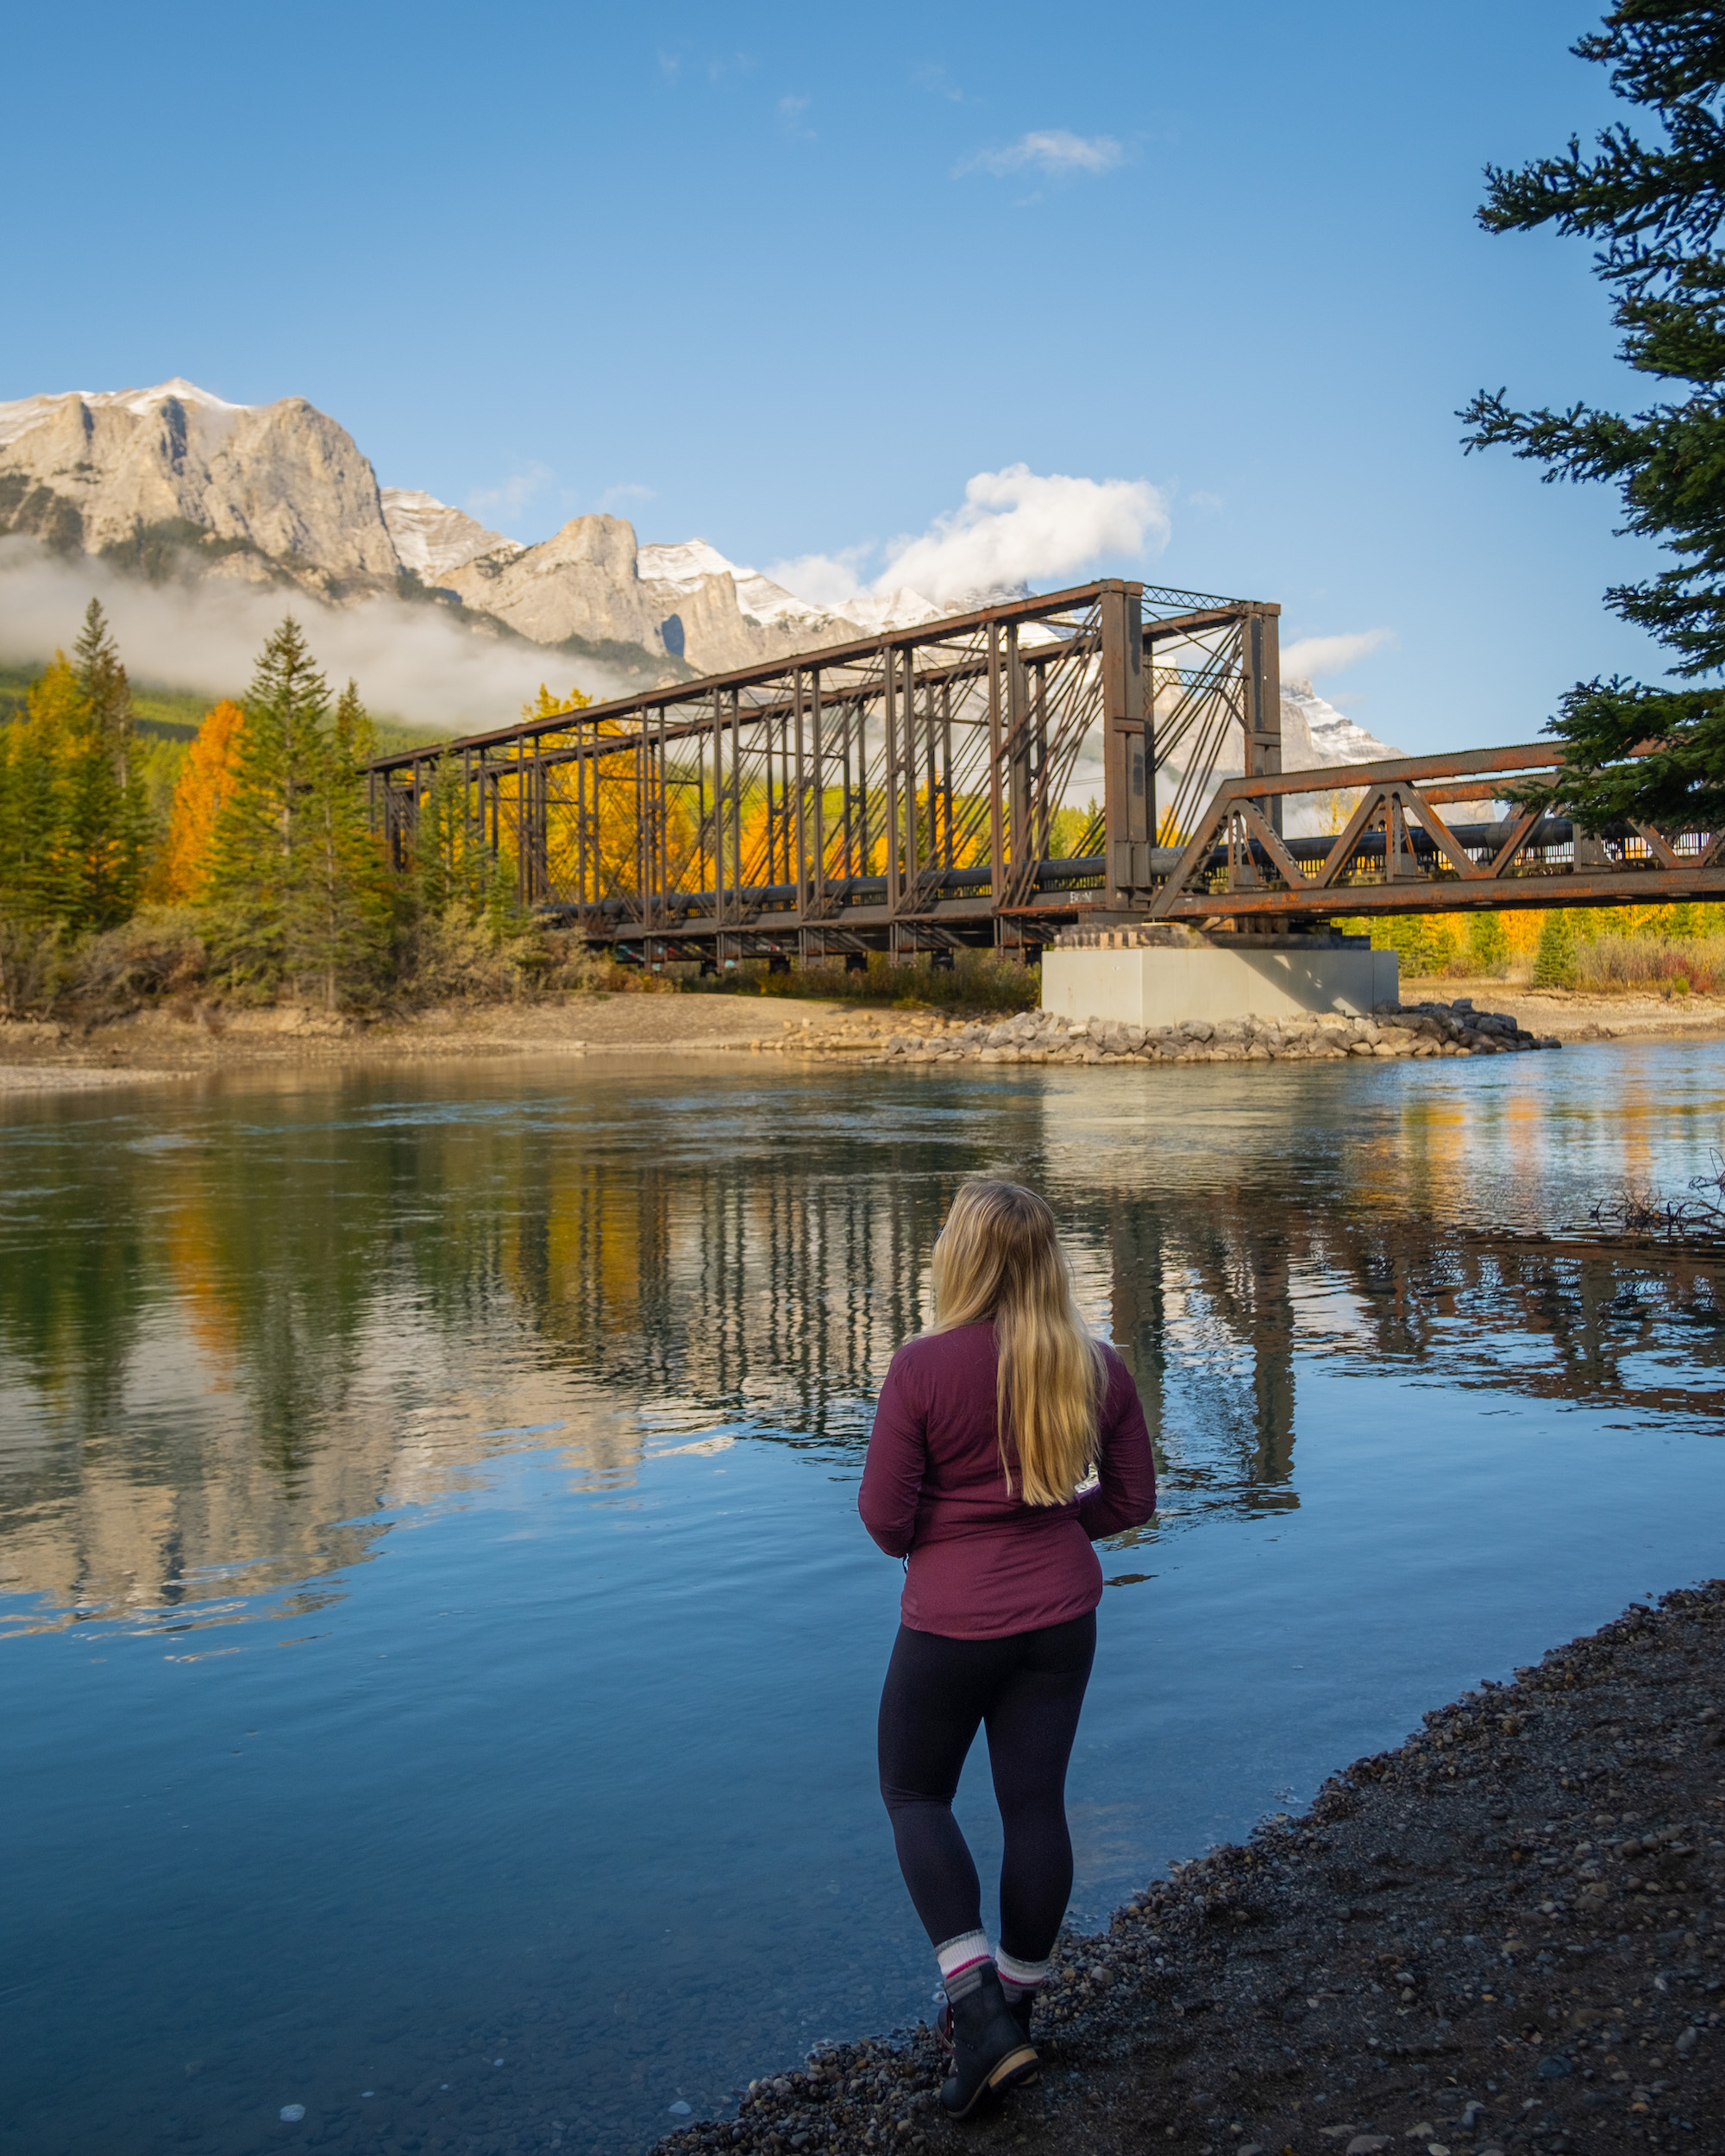 Natasha Looks Out To Engine Bridge In Canmore On Bow River